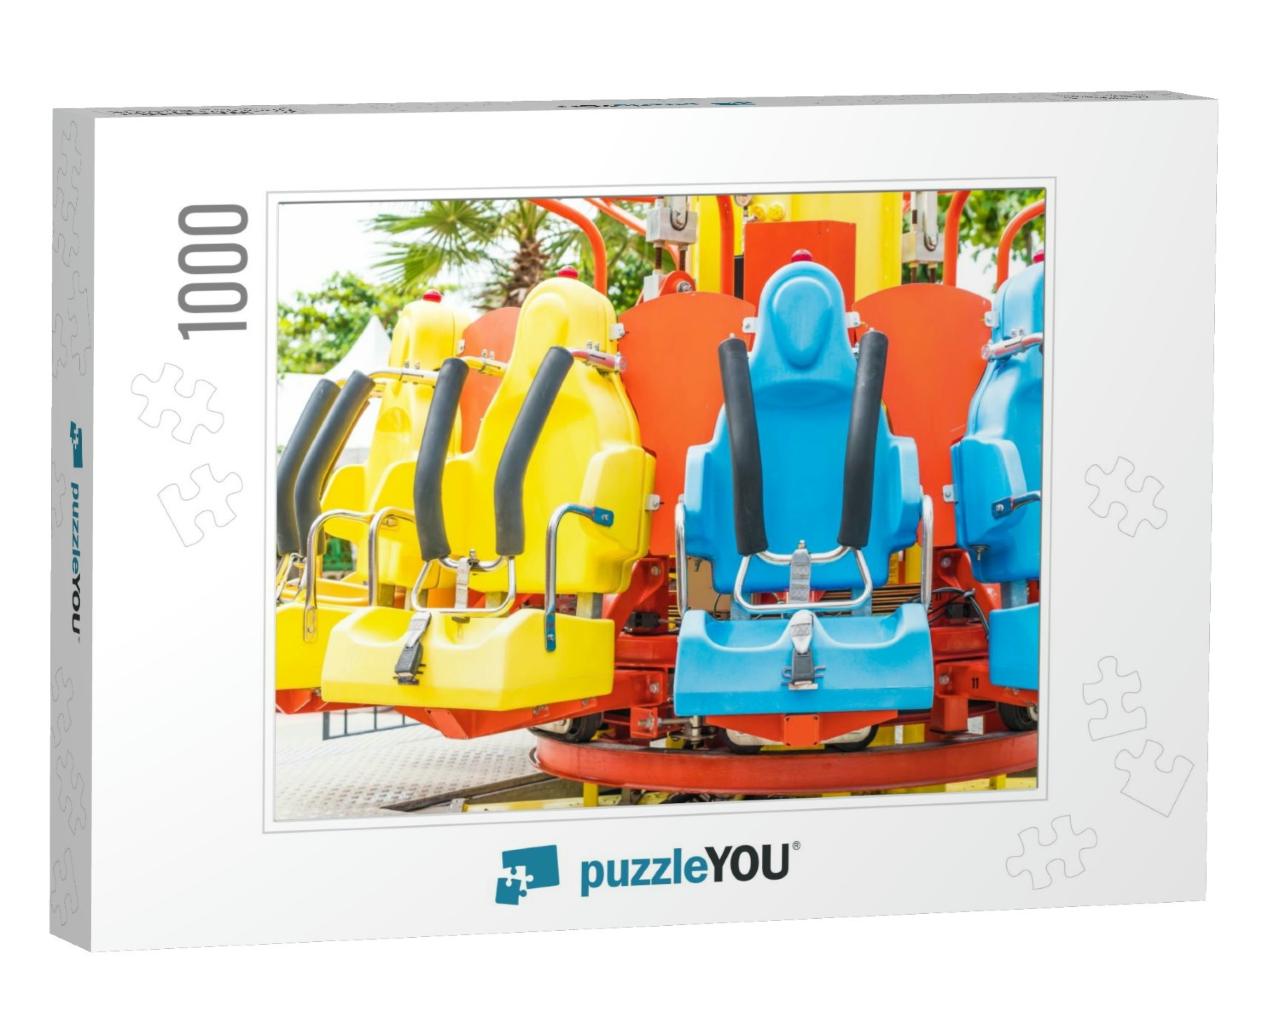 Colorful Roller Coaster Seats At Amusement Park in Thaila... Jigsaw Puzzle with 1000 pieces